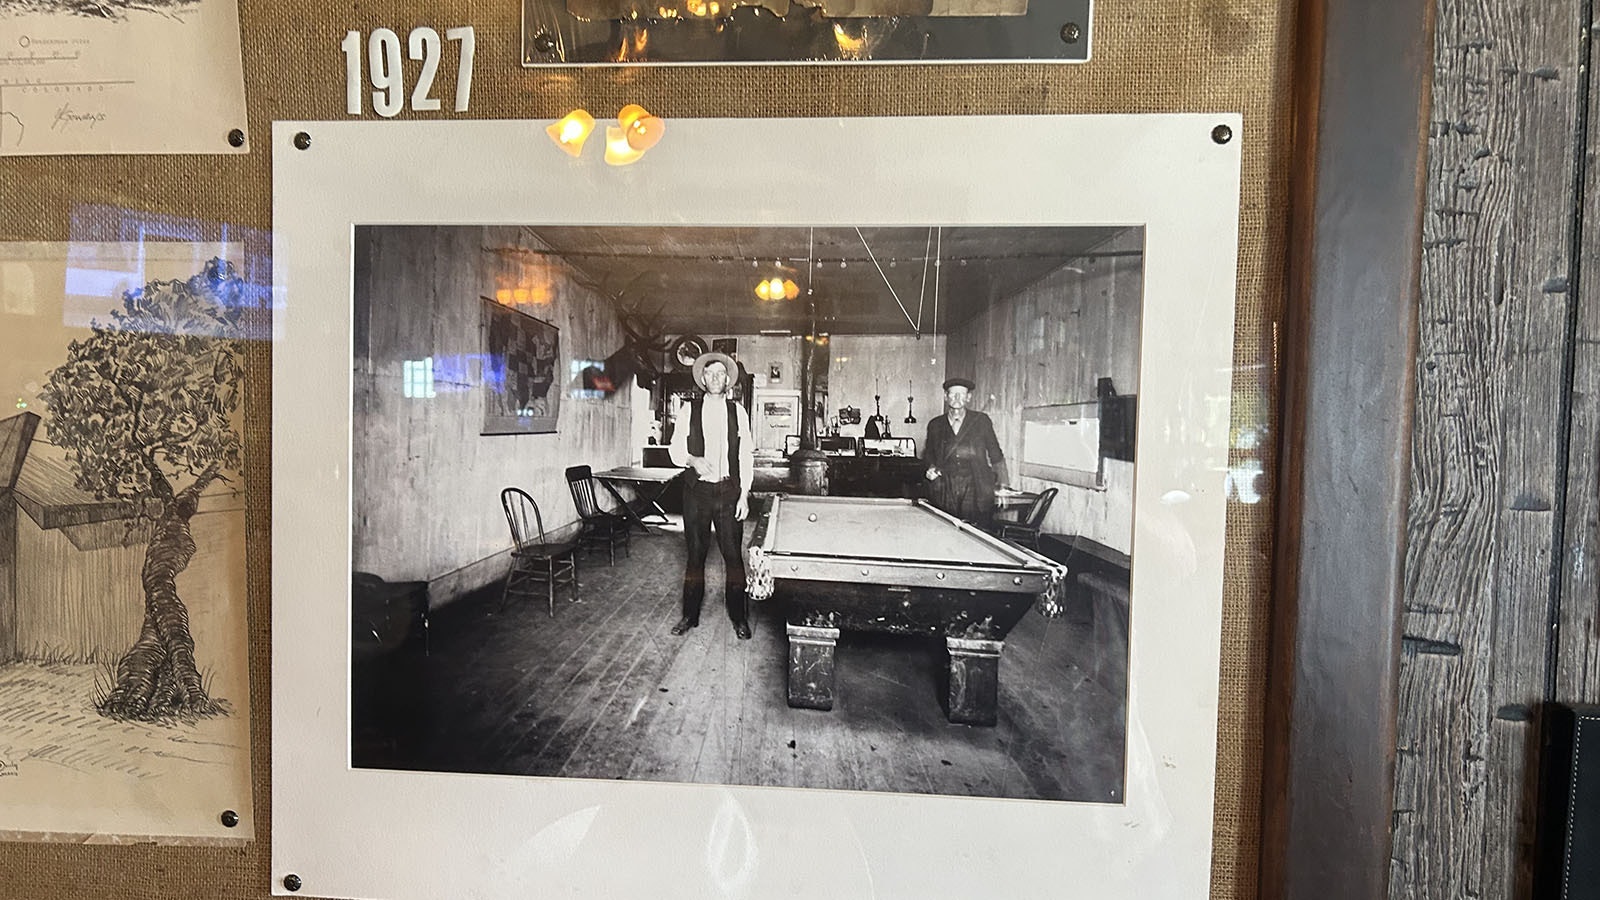 patrons of the Green River Bar shooting pool in 1927. Note the liquor cabinet in back left of the image. The same cabinet is still in the bar.